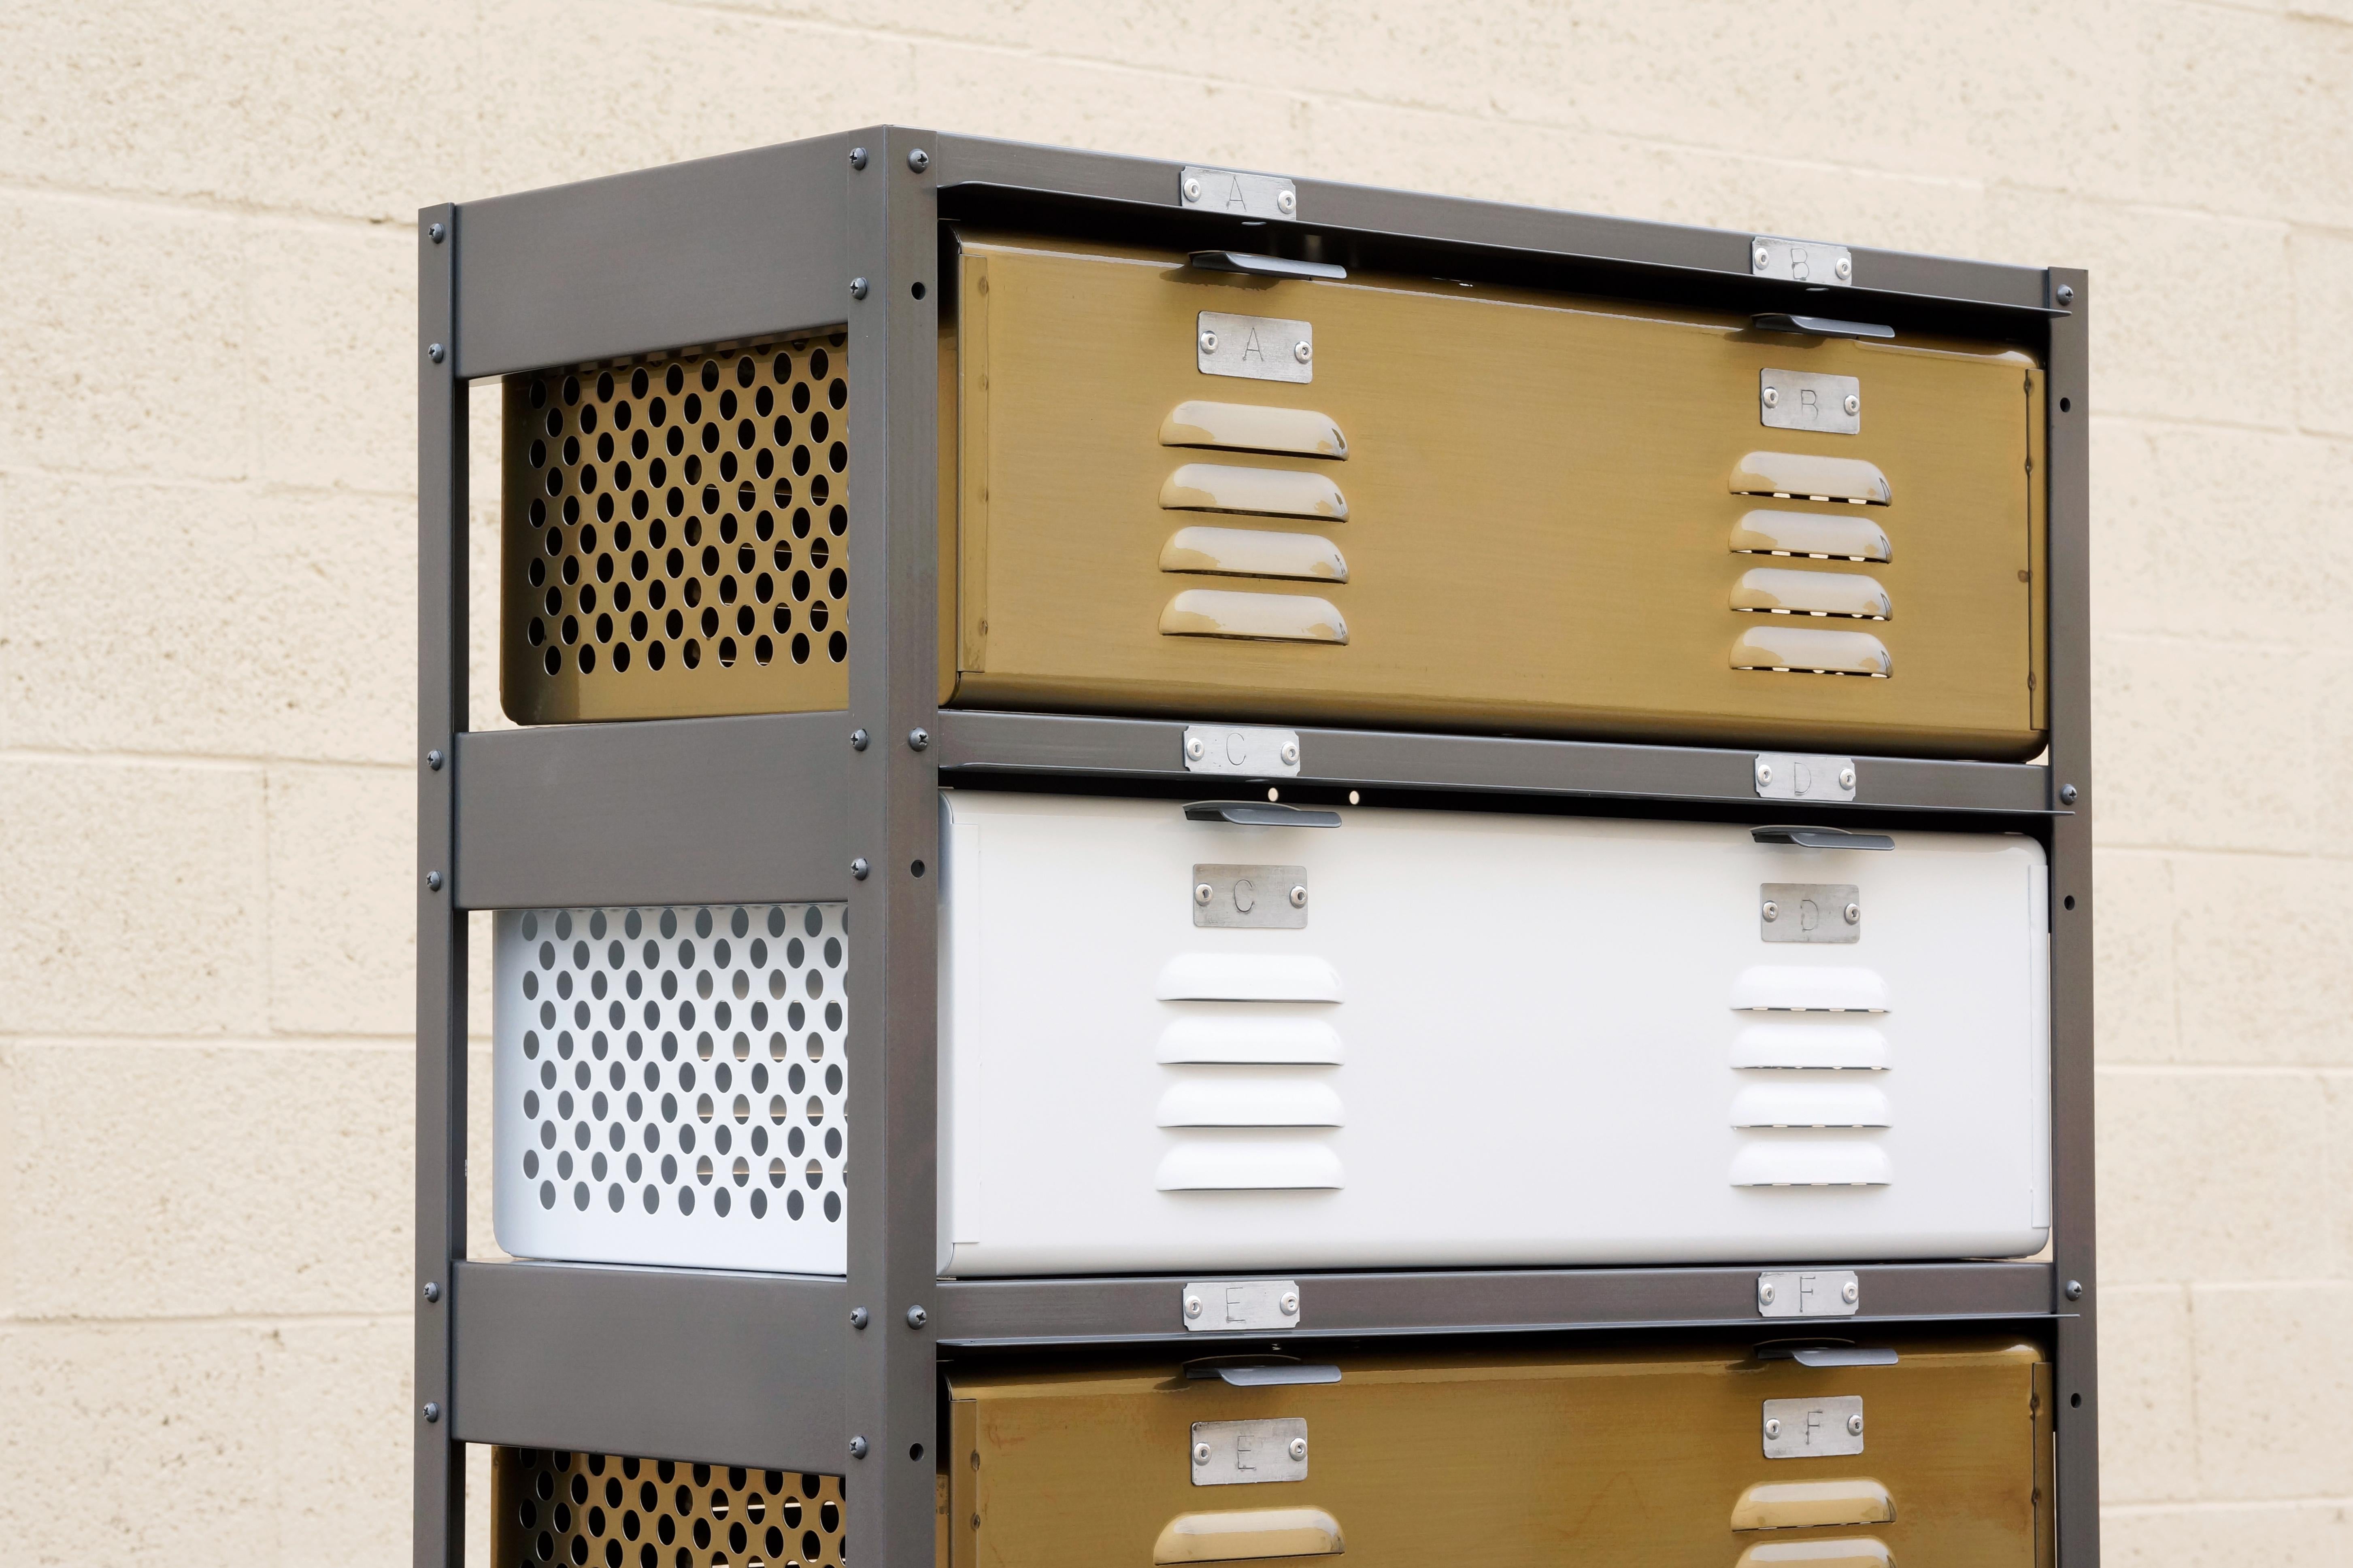 Please note: These images are a sample of our custom work. Please allow 3-4 weeks production.

All new, custom fabricated 2 wide x 6 high locker basket unit inspired by those of the 1950s and 1960s. Our new units feature a special update: Original